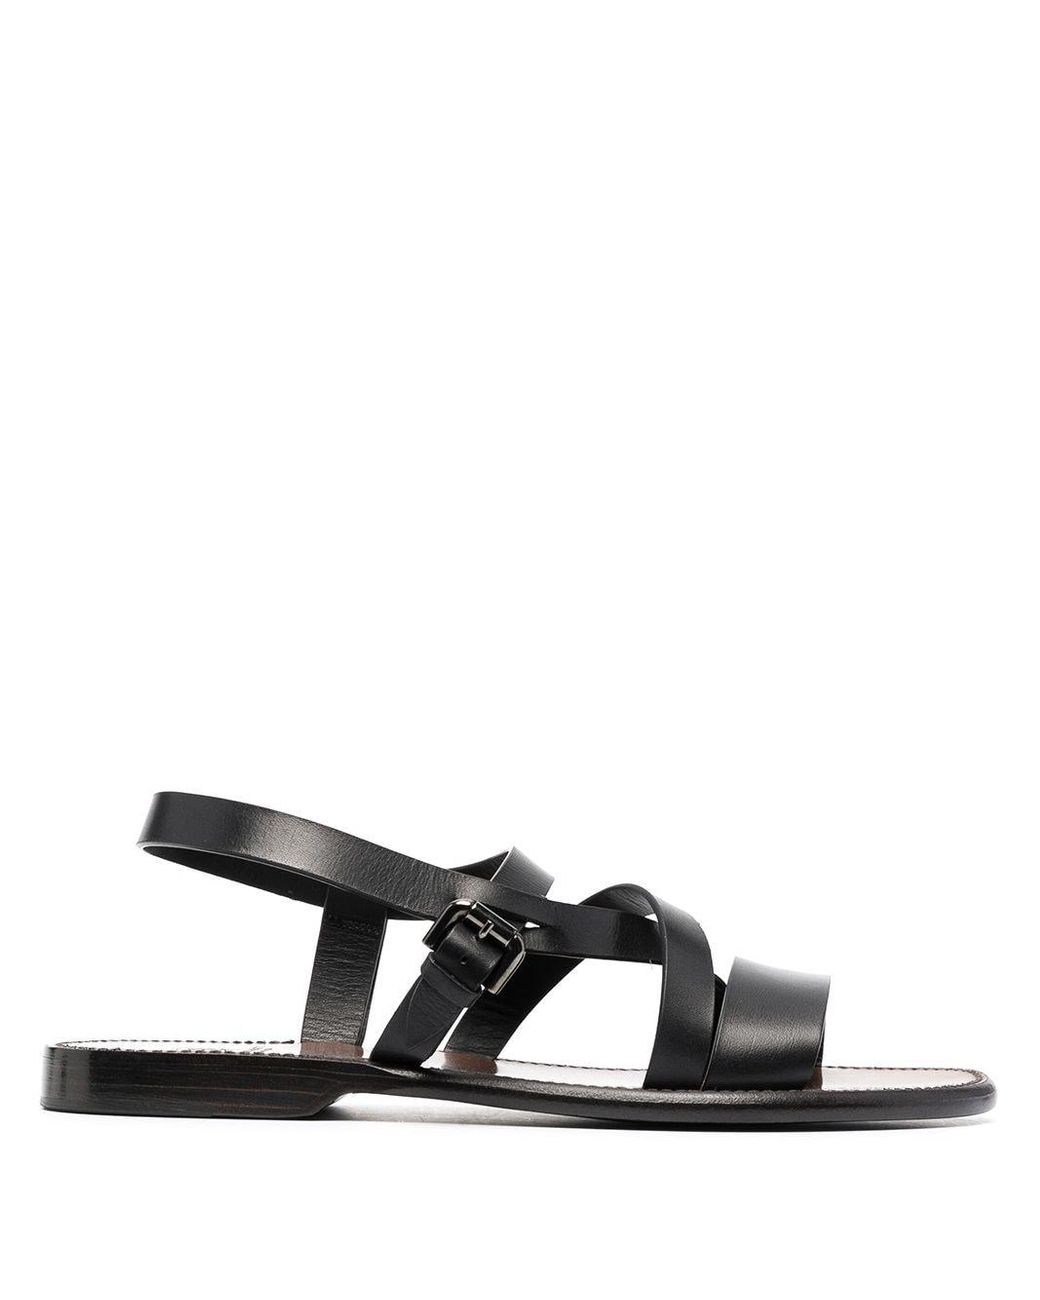 Silvano Sassetti Side-buckle Leather Sandals in Black for Men - Lyst